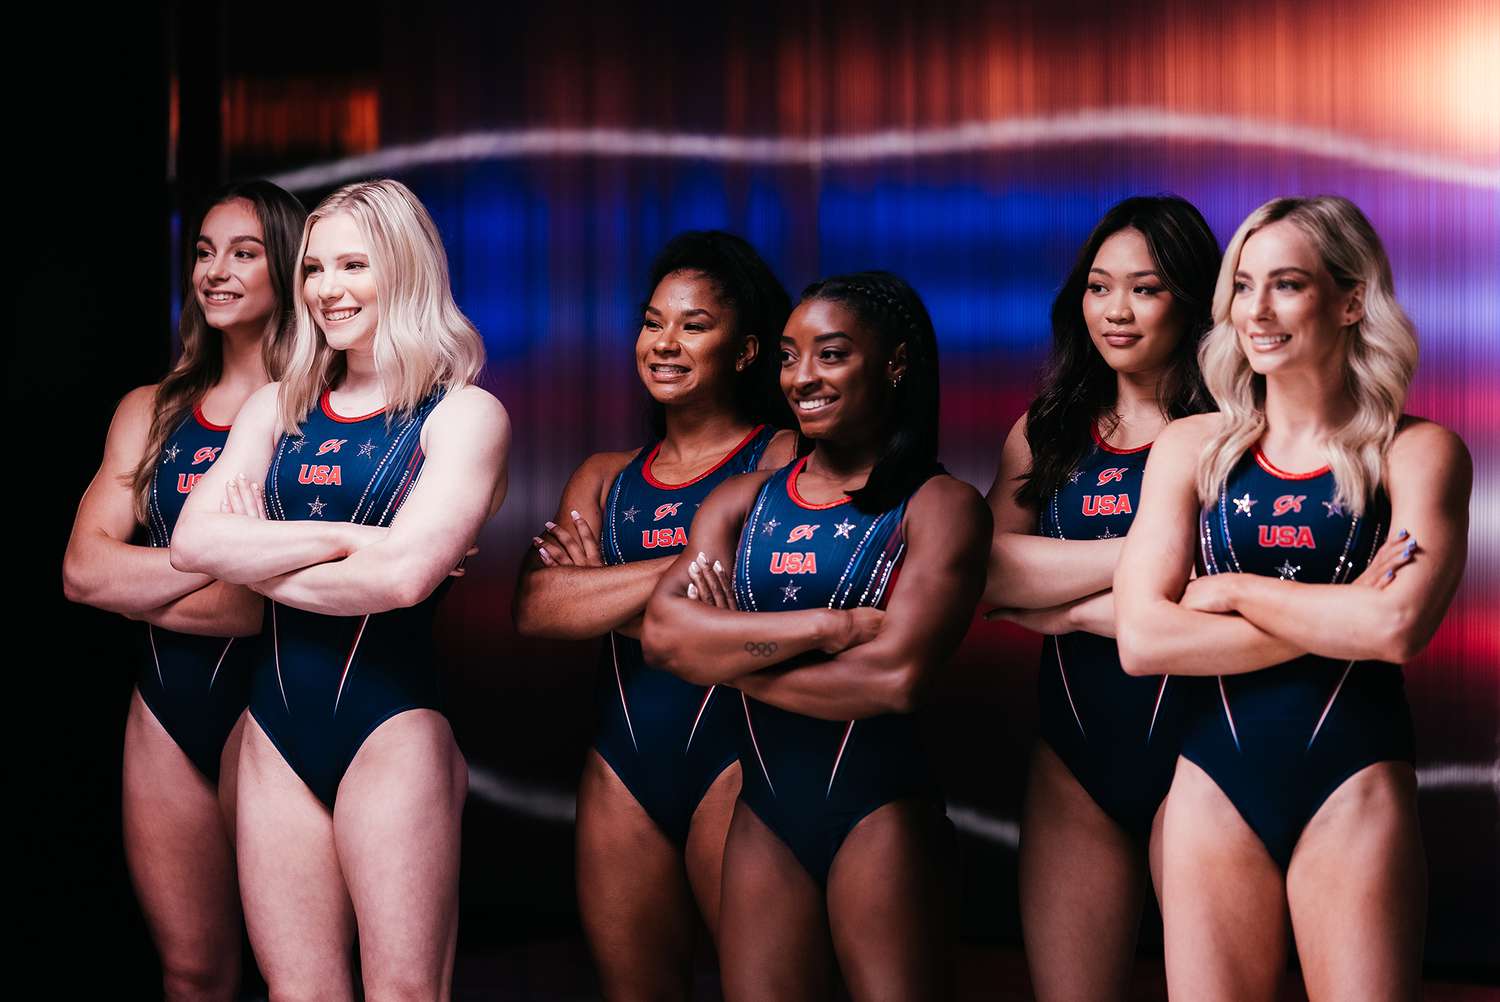 Usa Men S And Women S Gymnasts Look Fierce In New Team Photos People Com